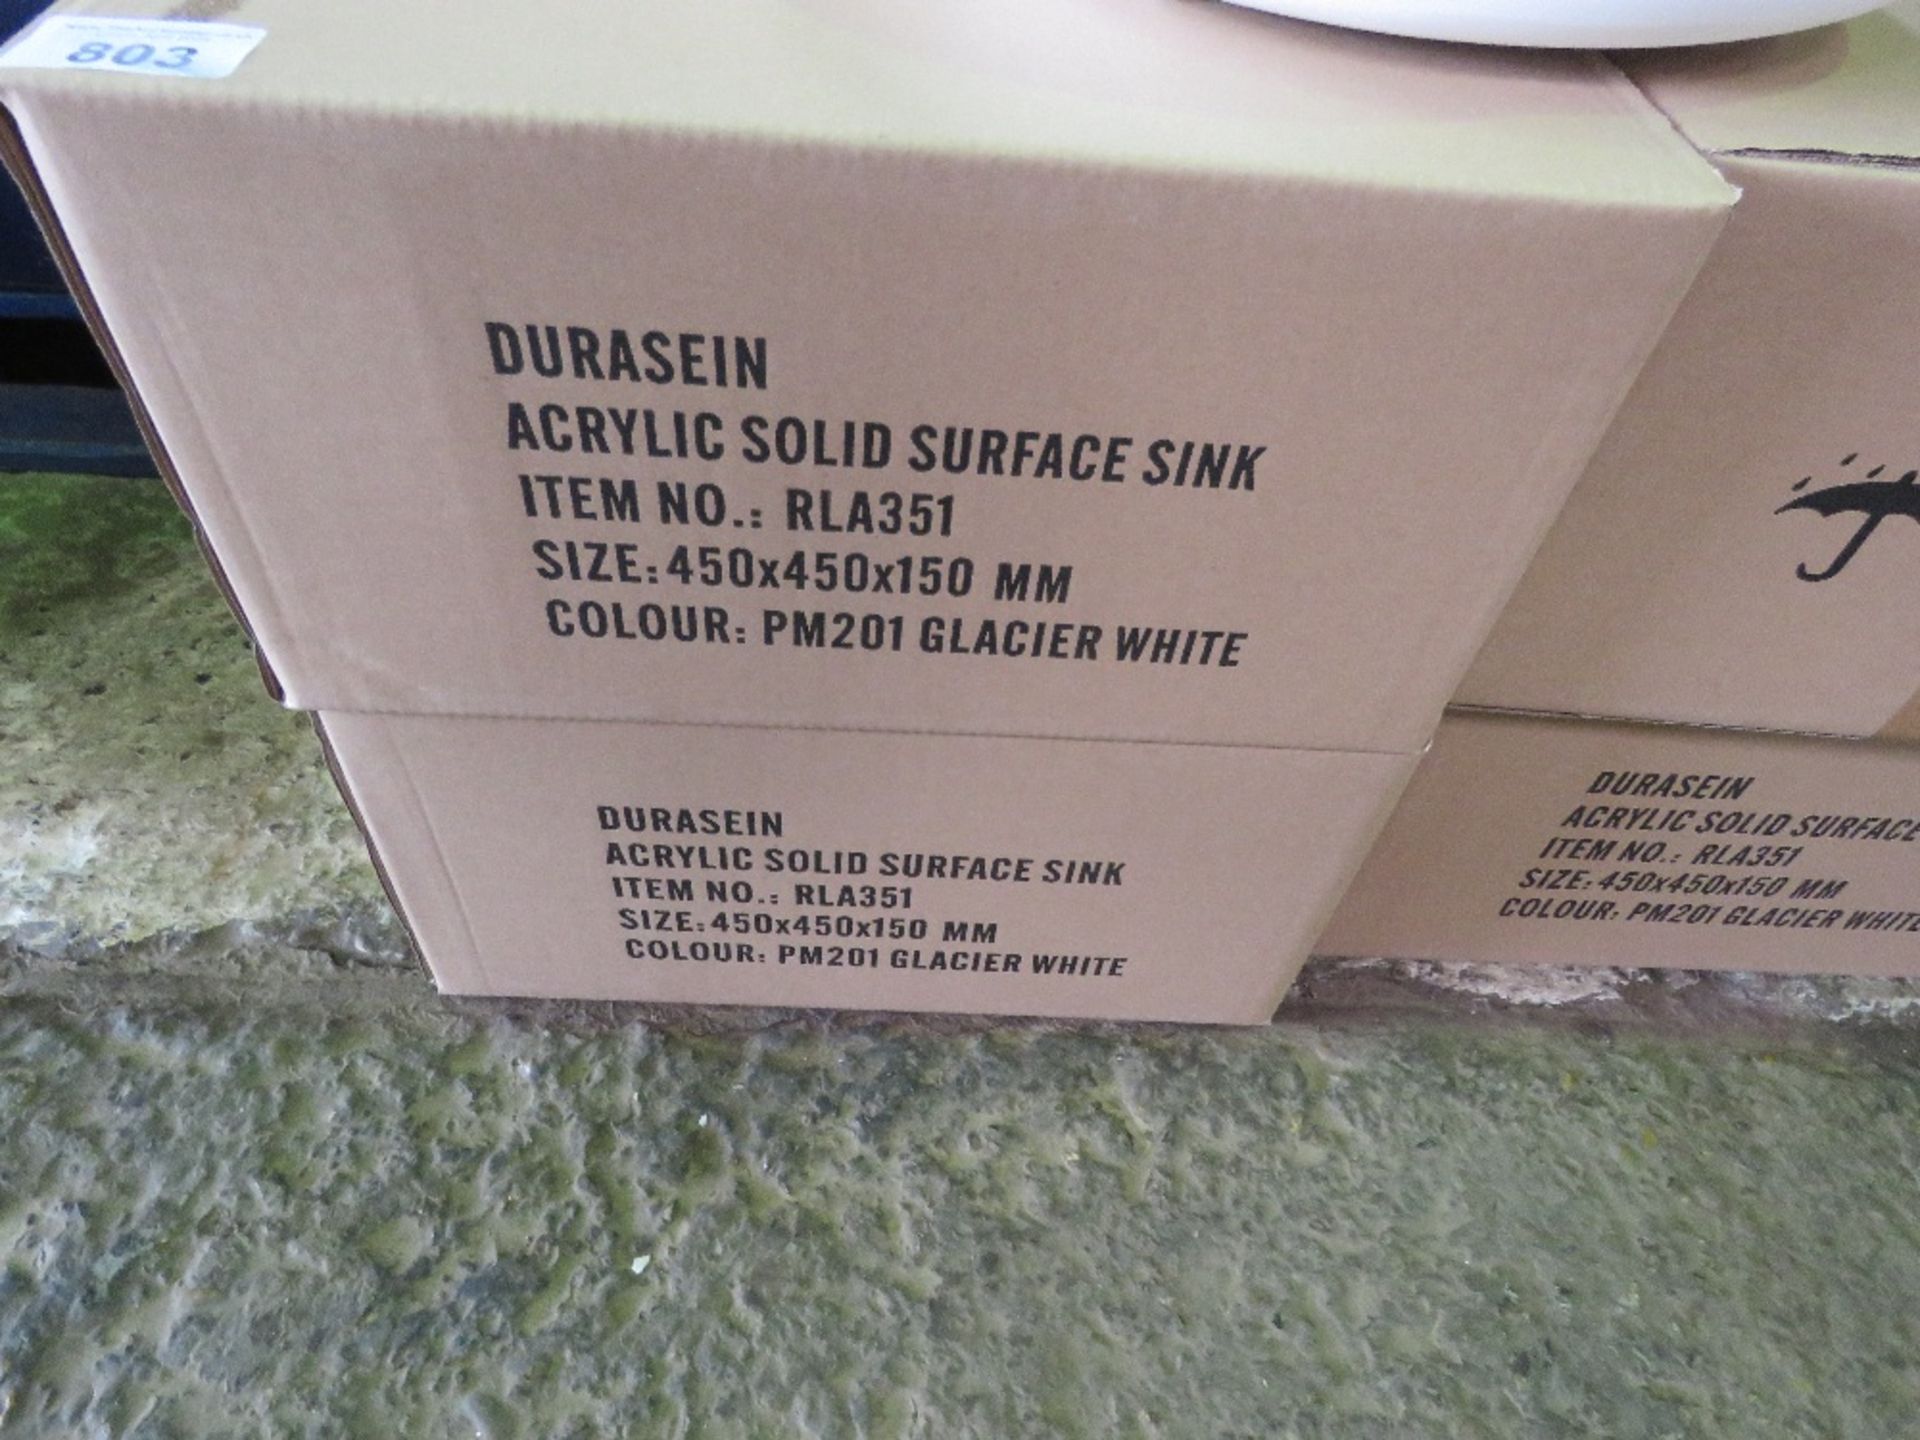 4NO DURASEIN 450X450X150 SOLID SURFACE ACRYLIC SINK, UNUSED, SURPLUS STOCK. - Image 2 of 3